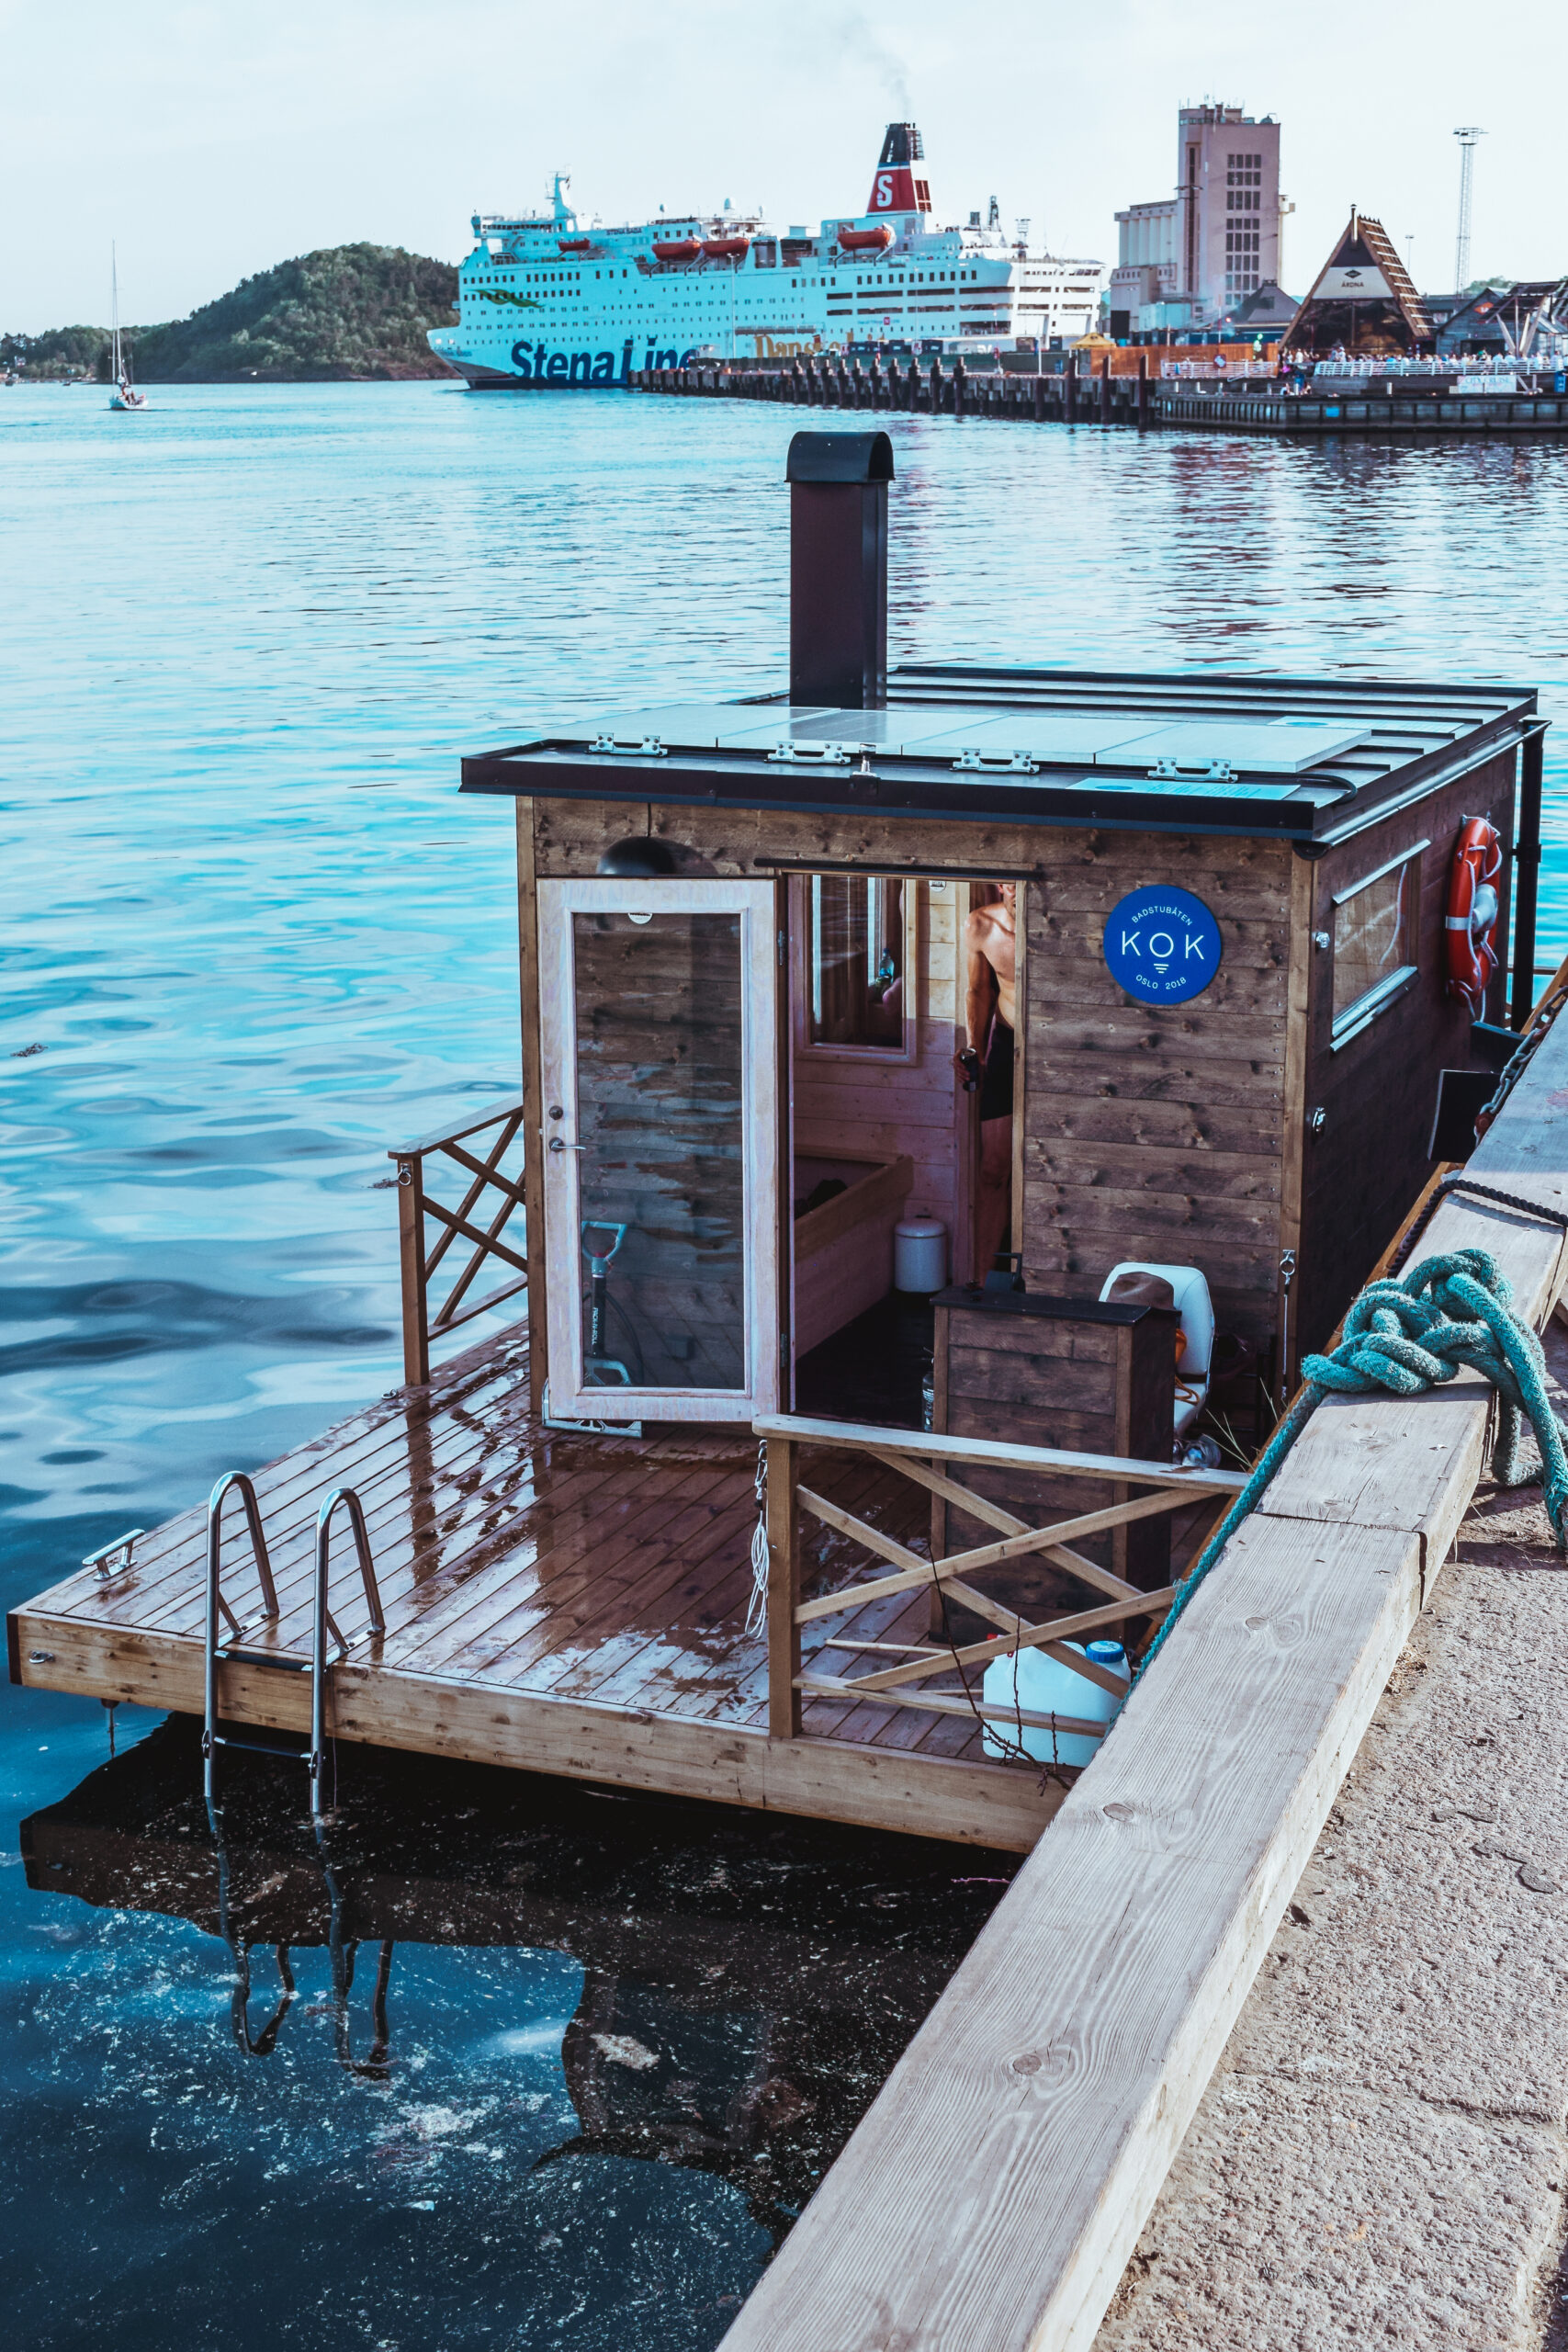 How-To-Travel-In-Norway-24-Hours-In-Oslo-On-A-Budget-travel-blog-svadore Top Things to Do in One Day in Oslo in May Sauna